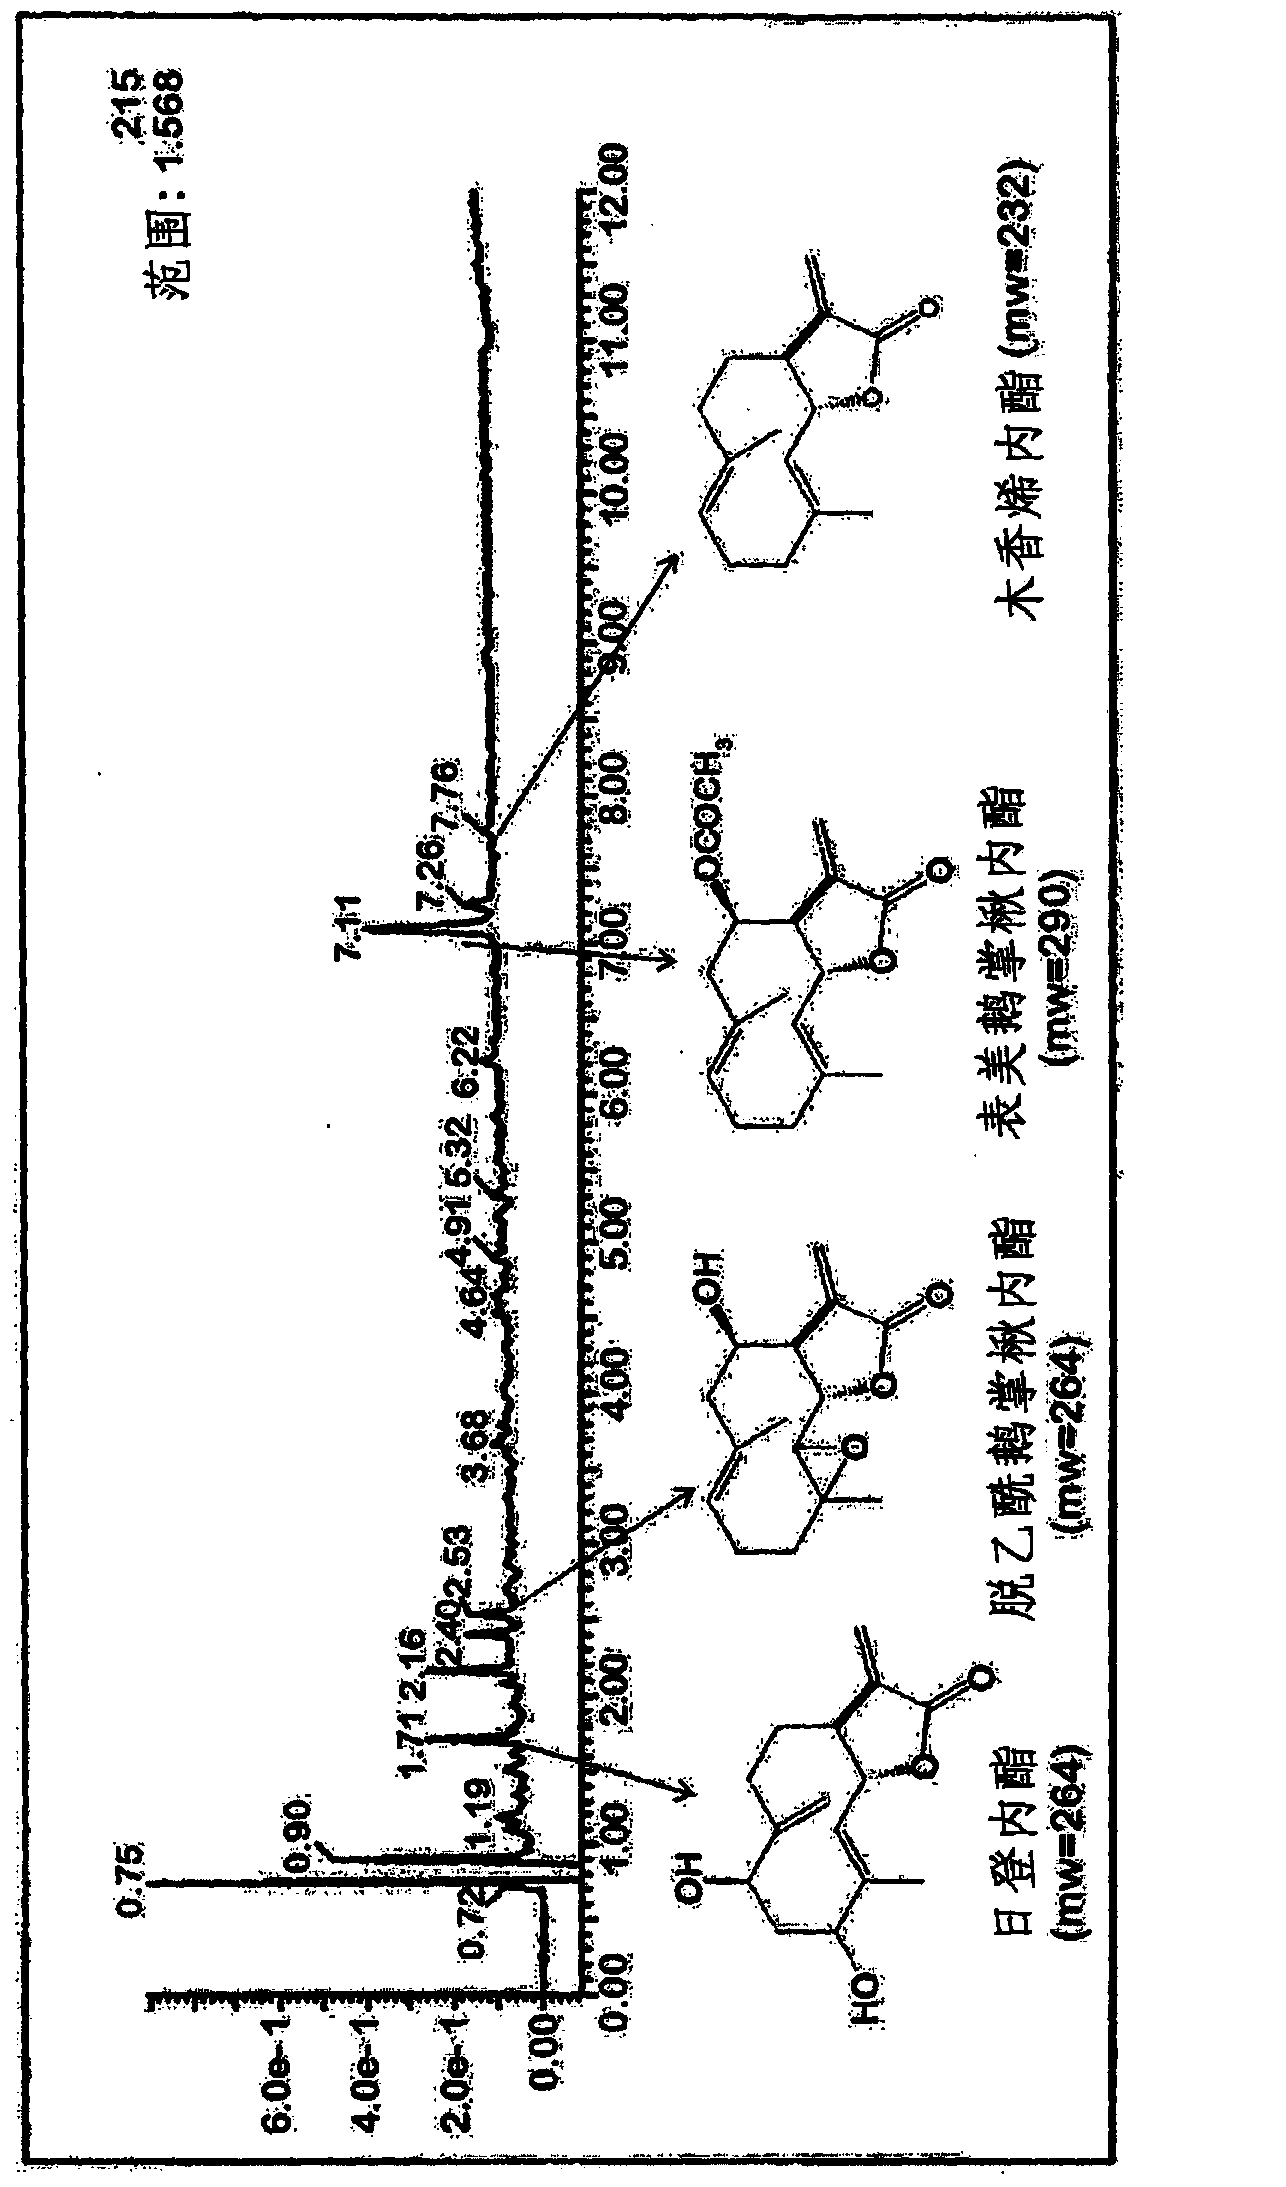 Pharmaceutical composition containing as active ingredient extract from bark of liriodendron tulipifera